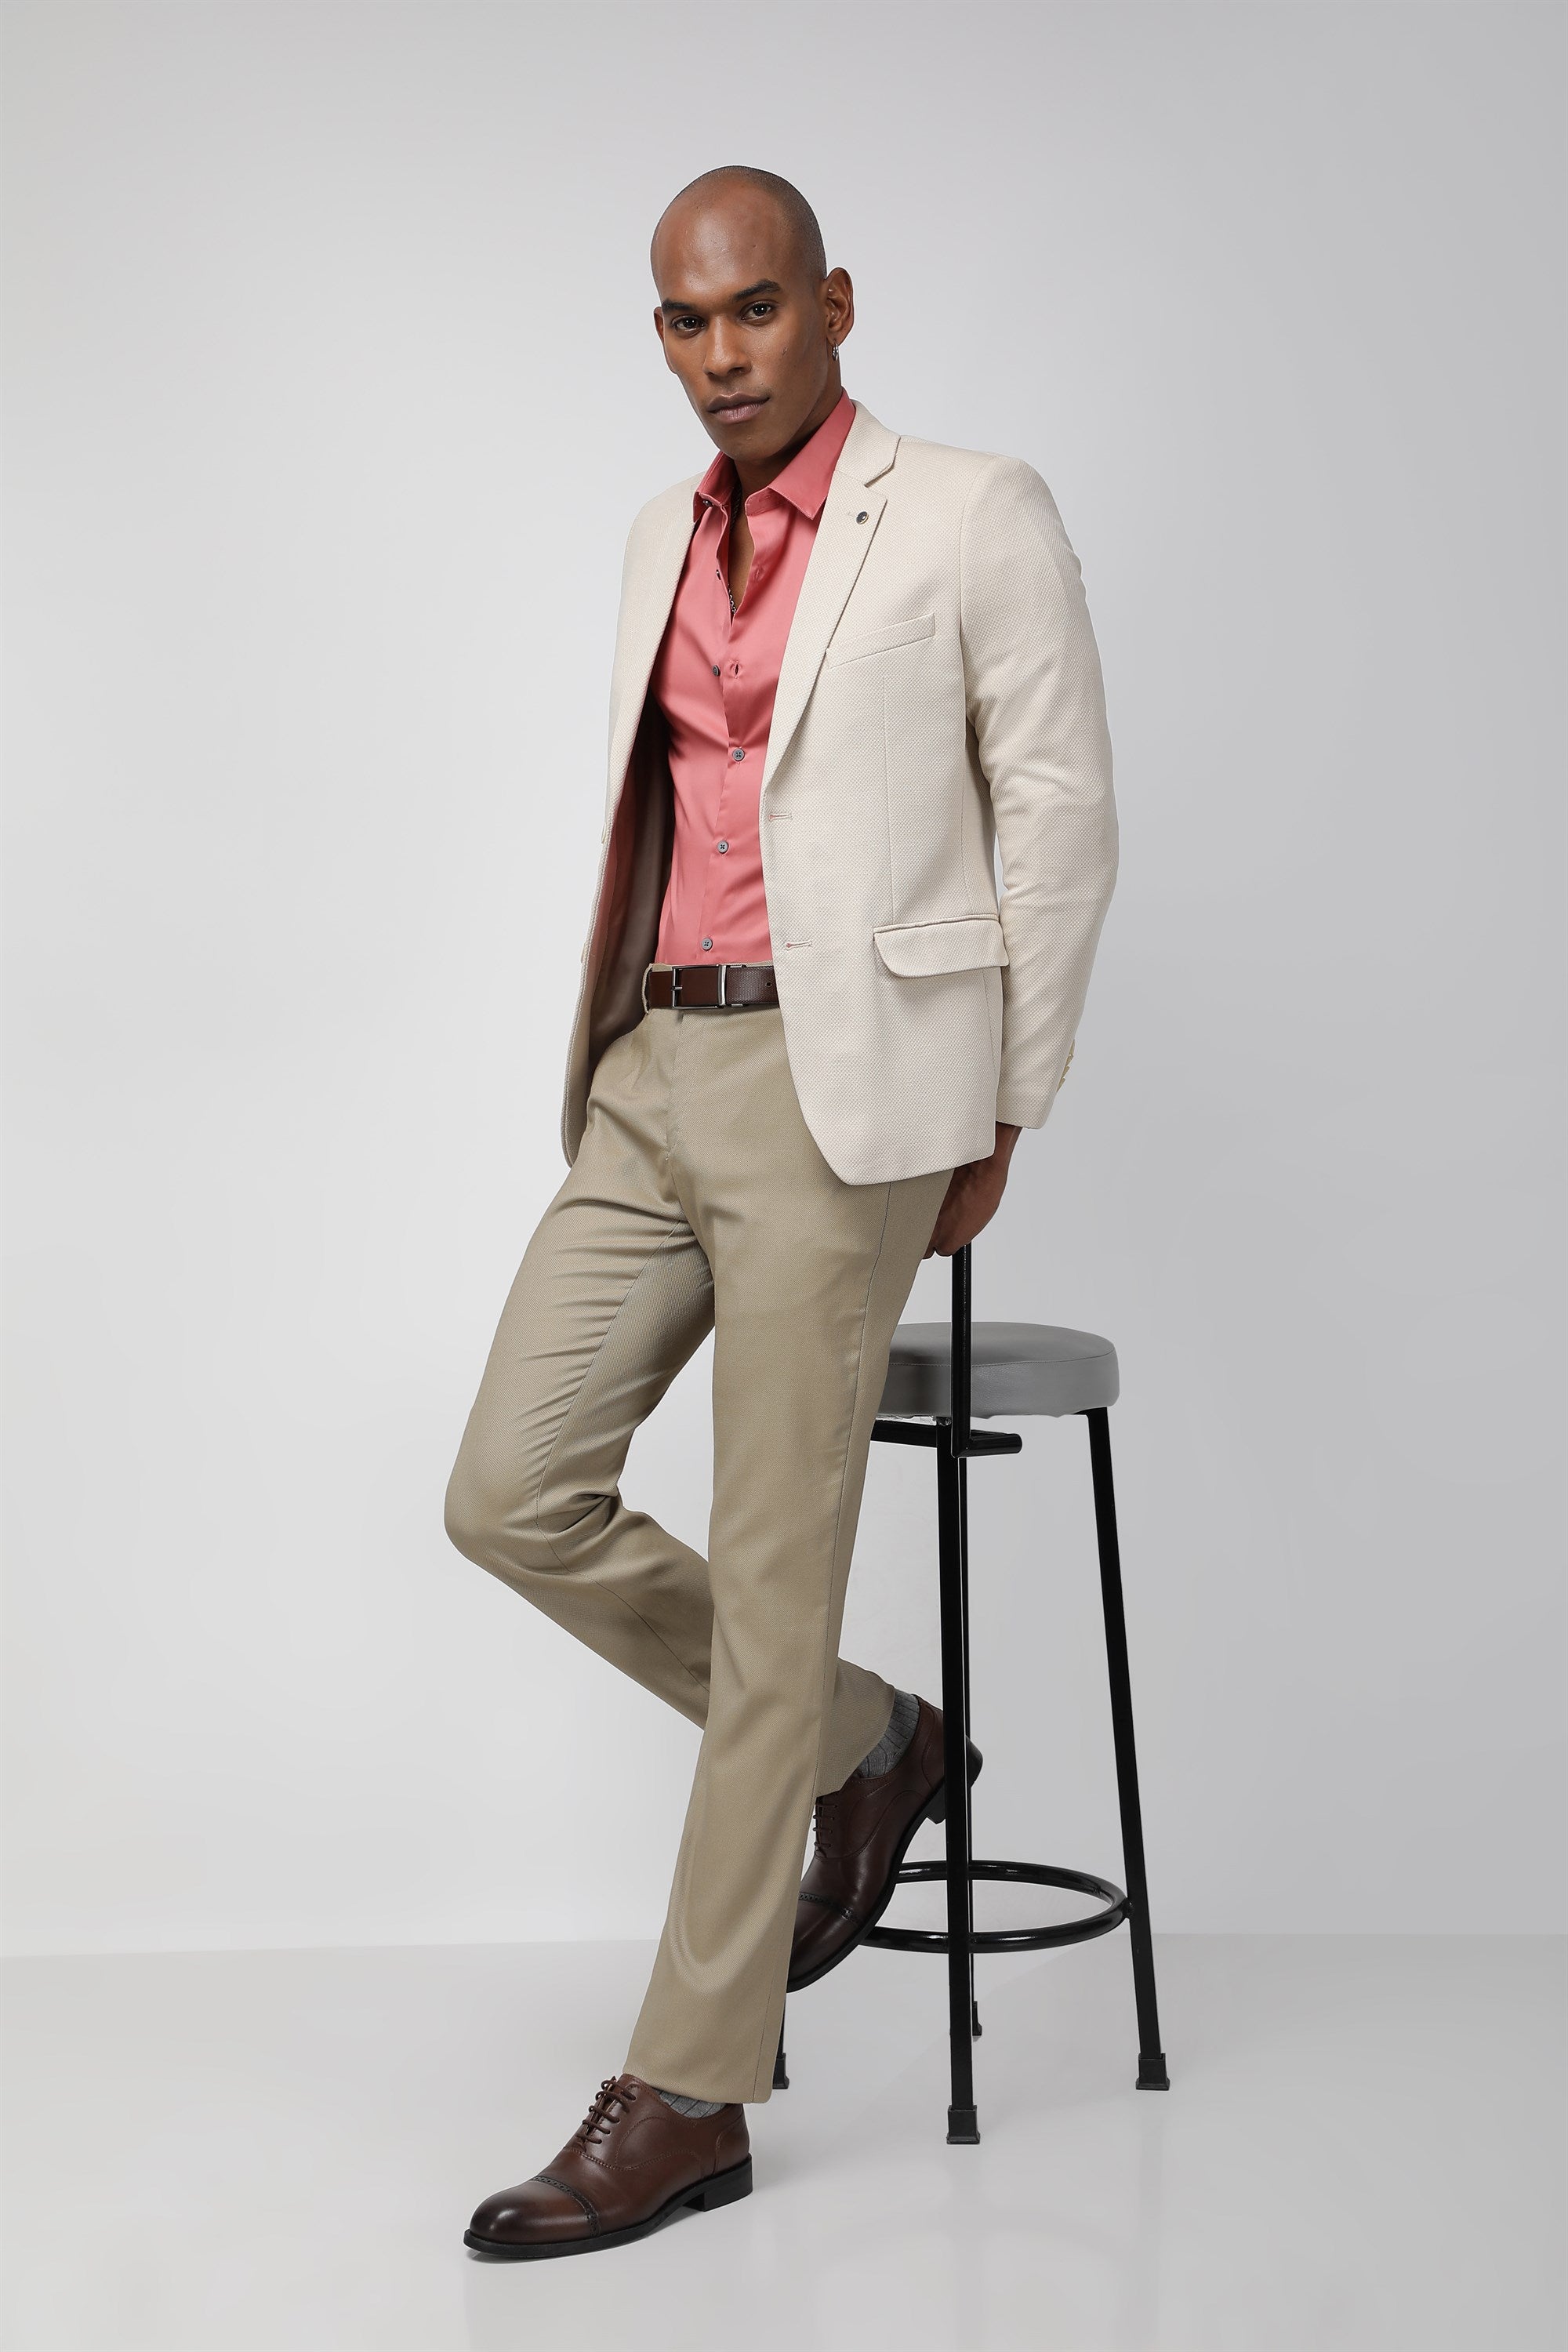 T the brand Regular Collar Slim Fit Satin Shirt with Full Sleeves - Peach